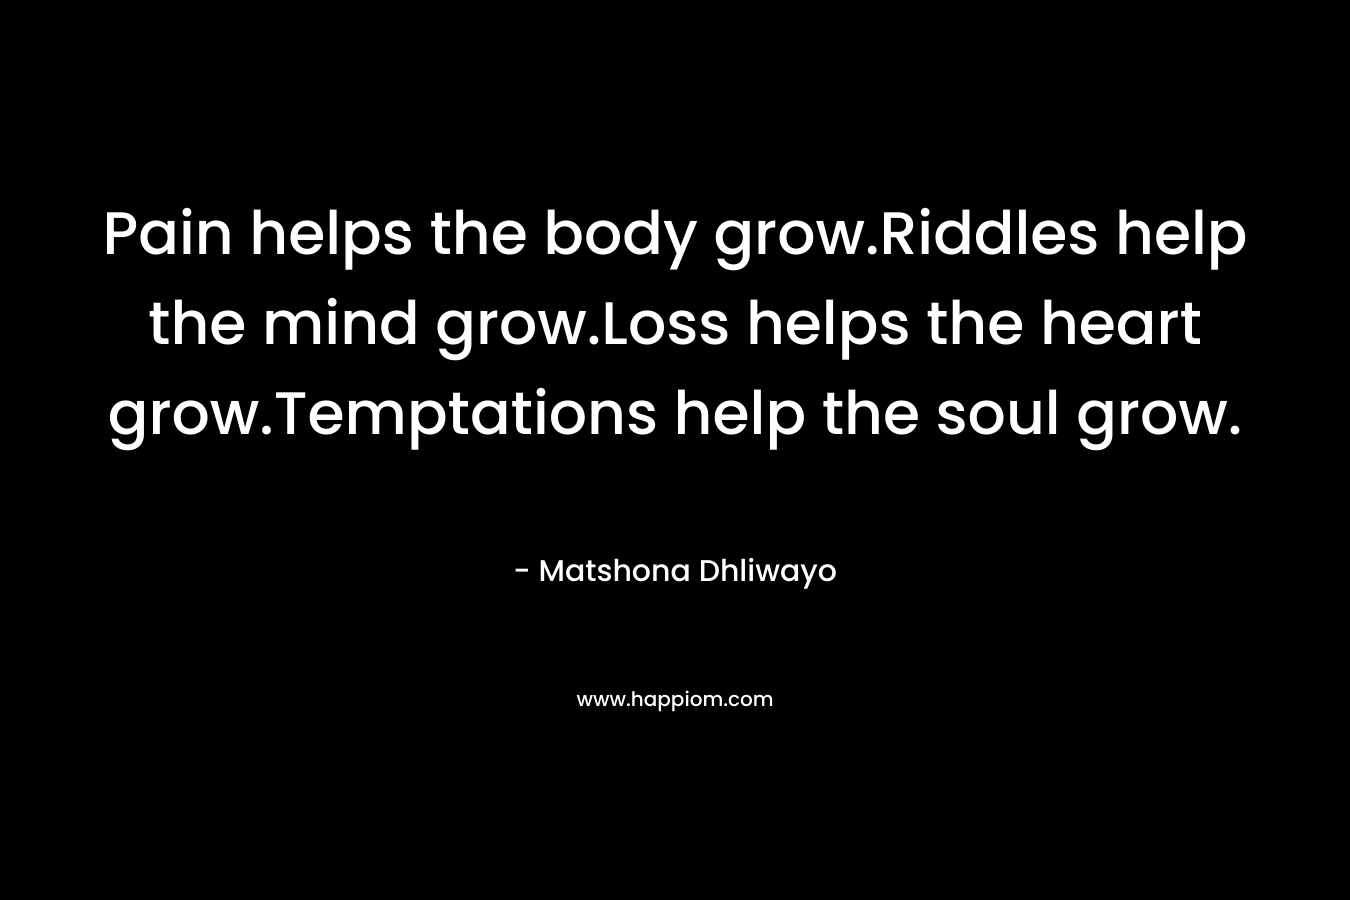 Pain helps the body grow.Riddles help the mind grow.Loss helps the heart grow.Temptations help the soul grow.